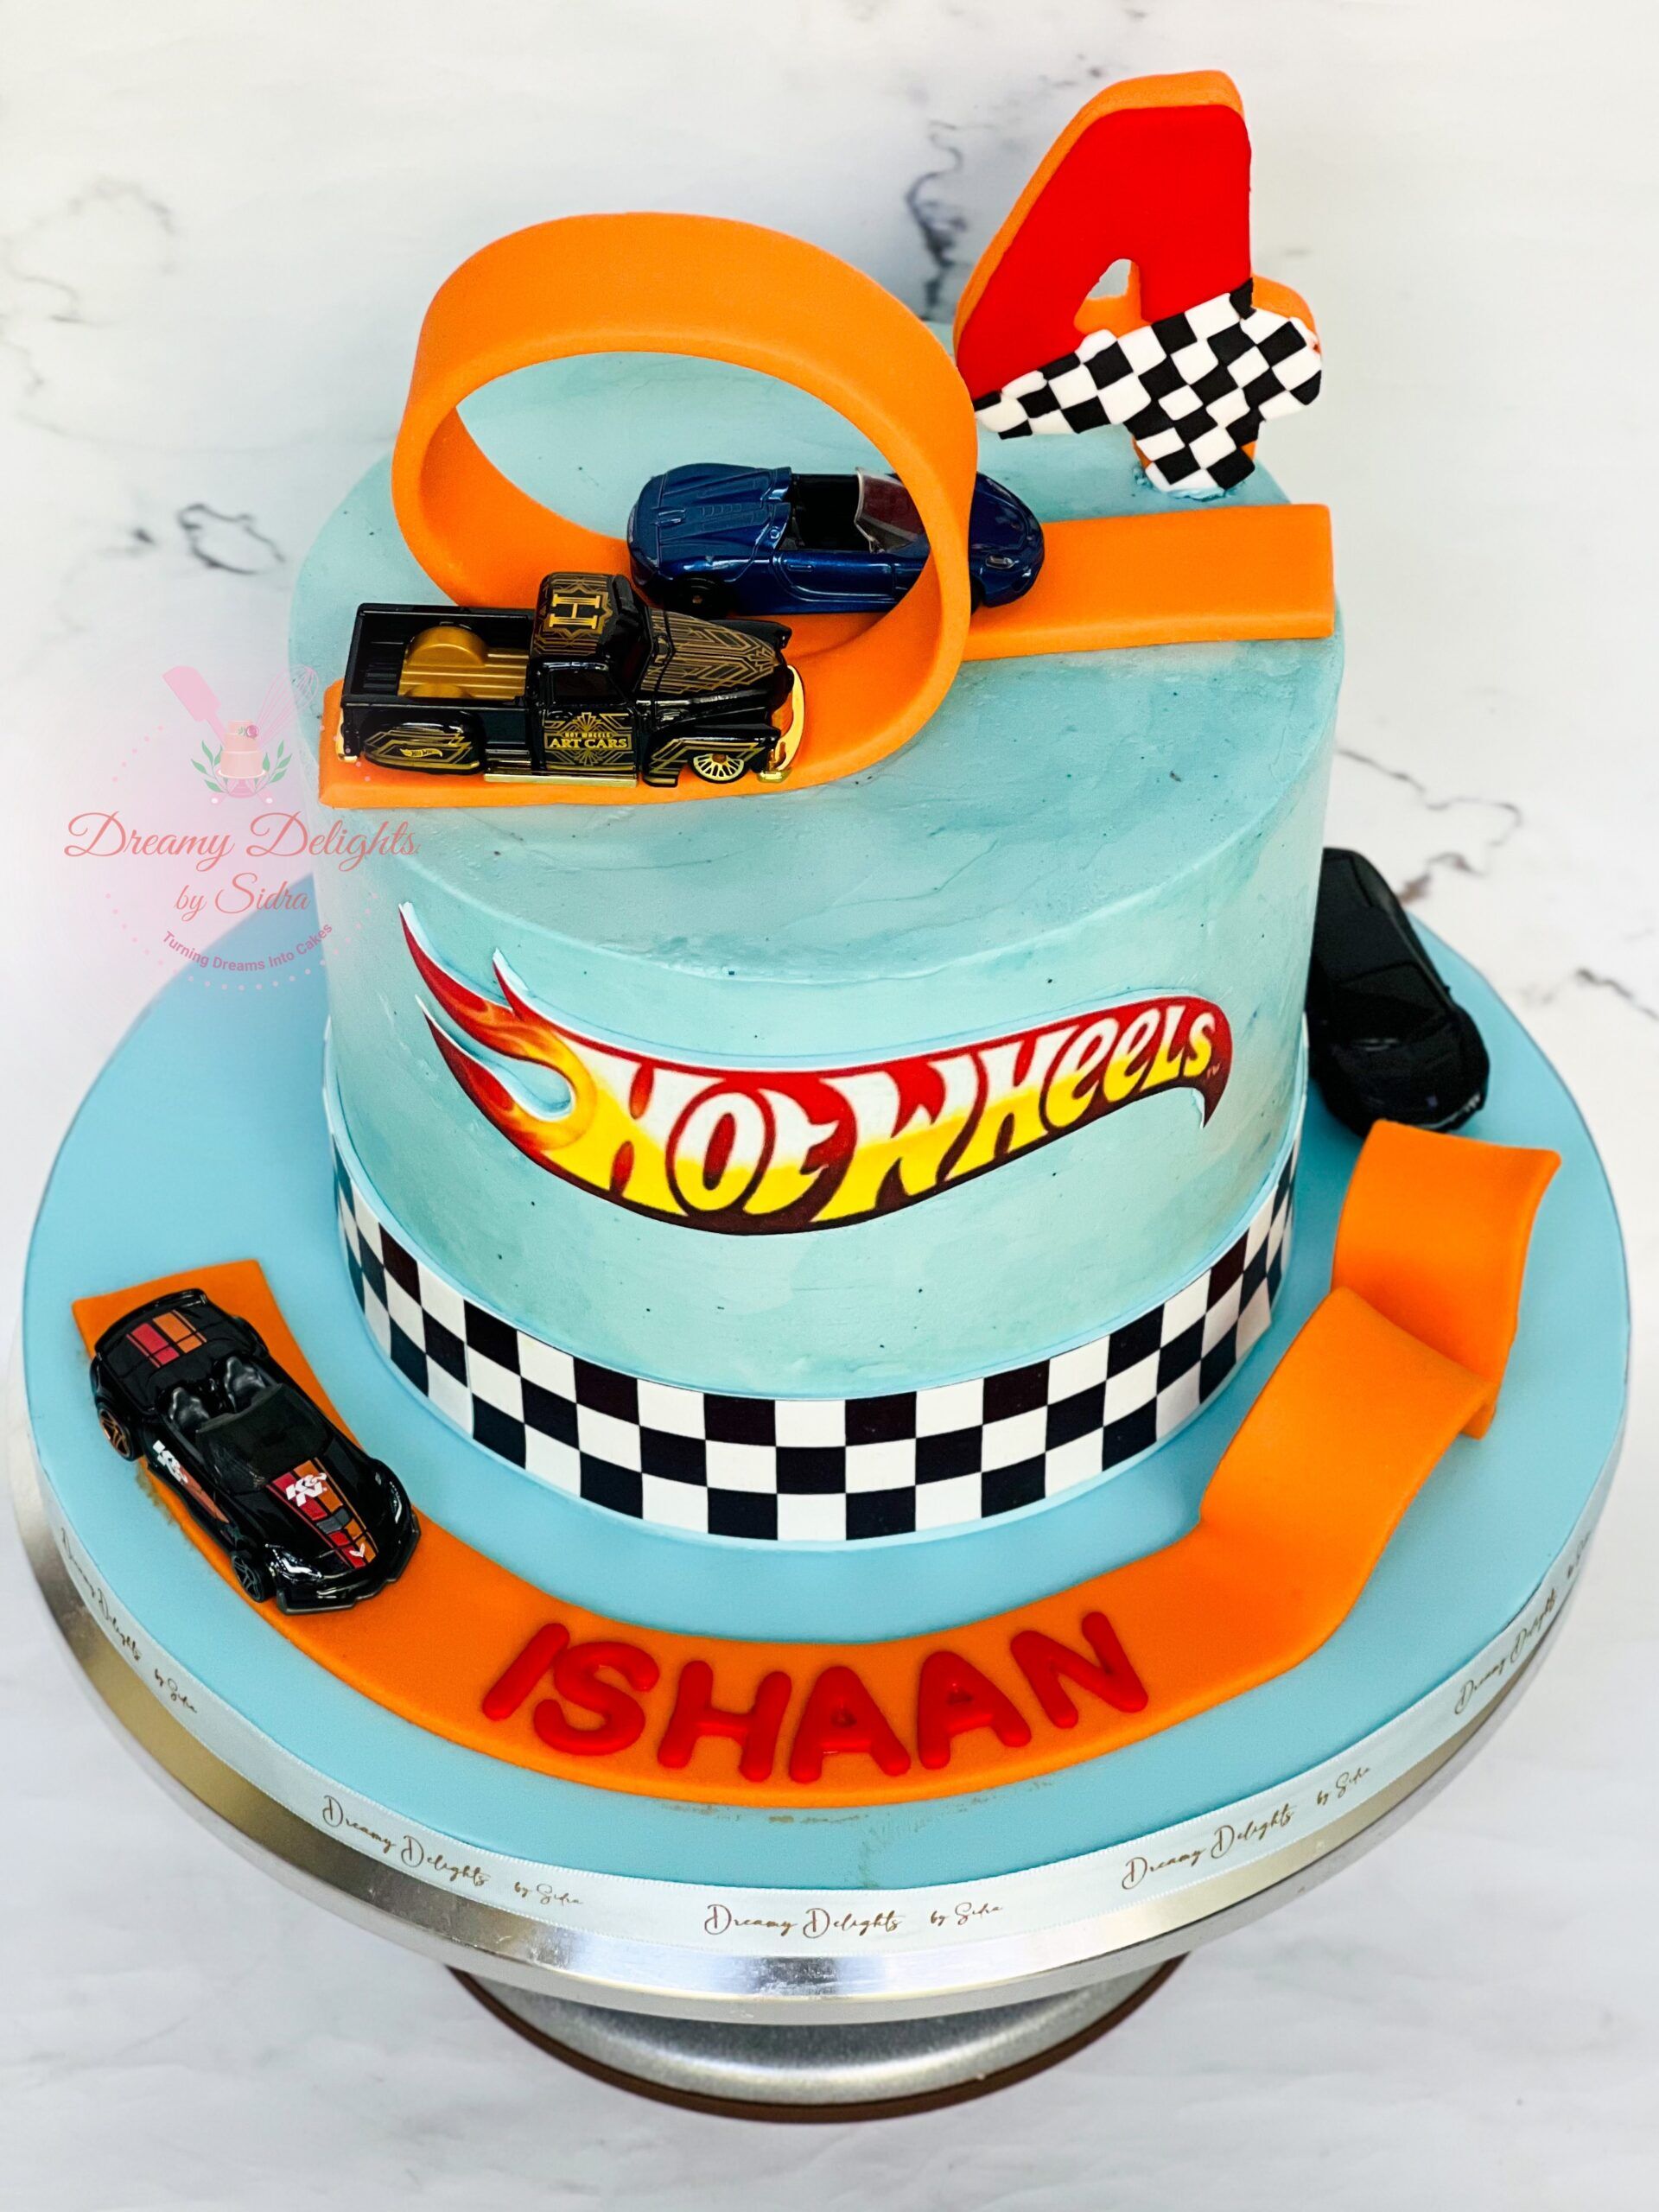 Hot Wheels Cake - Decorated Cake by Cherry on Top Cakes - CakesDecor